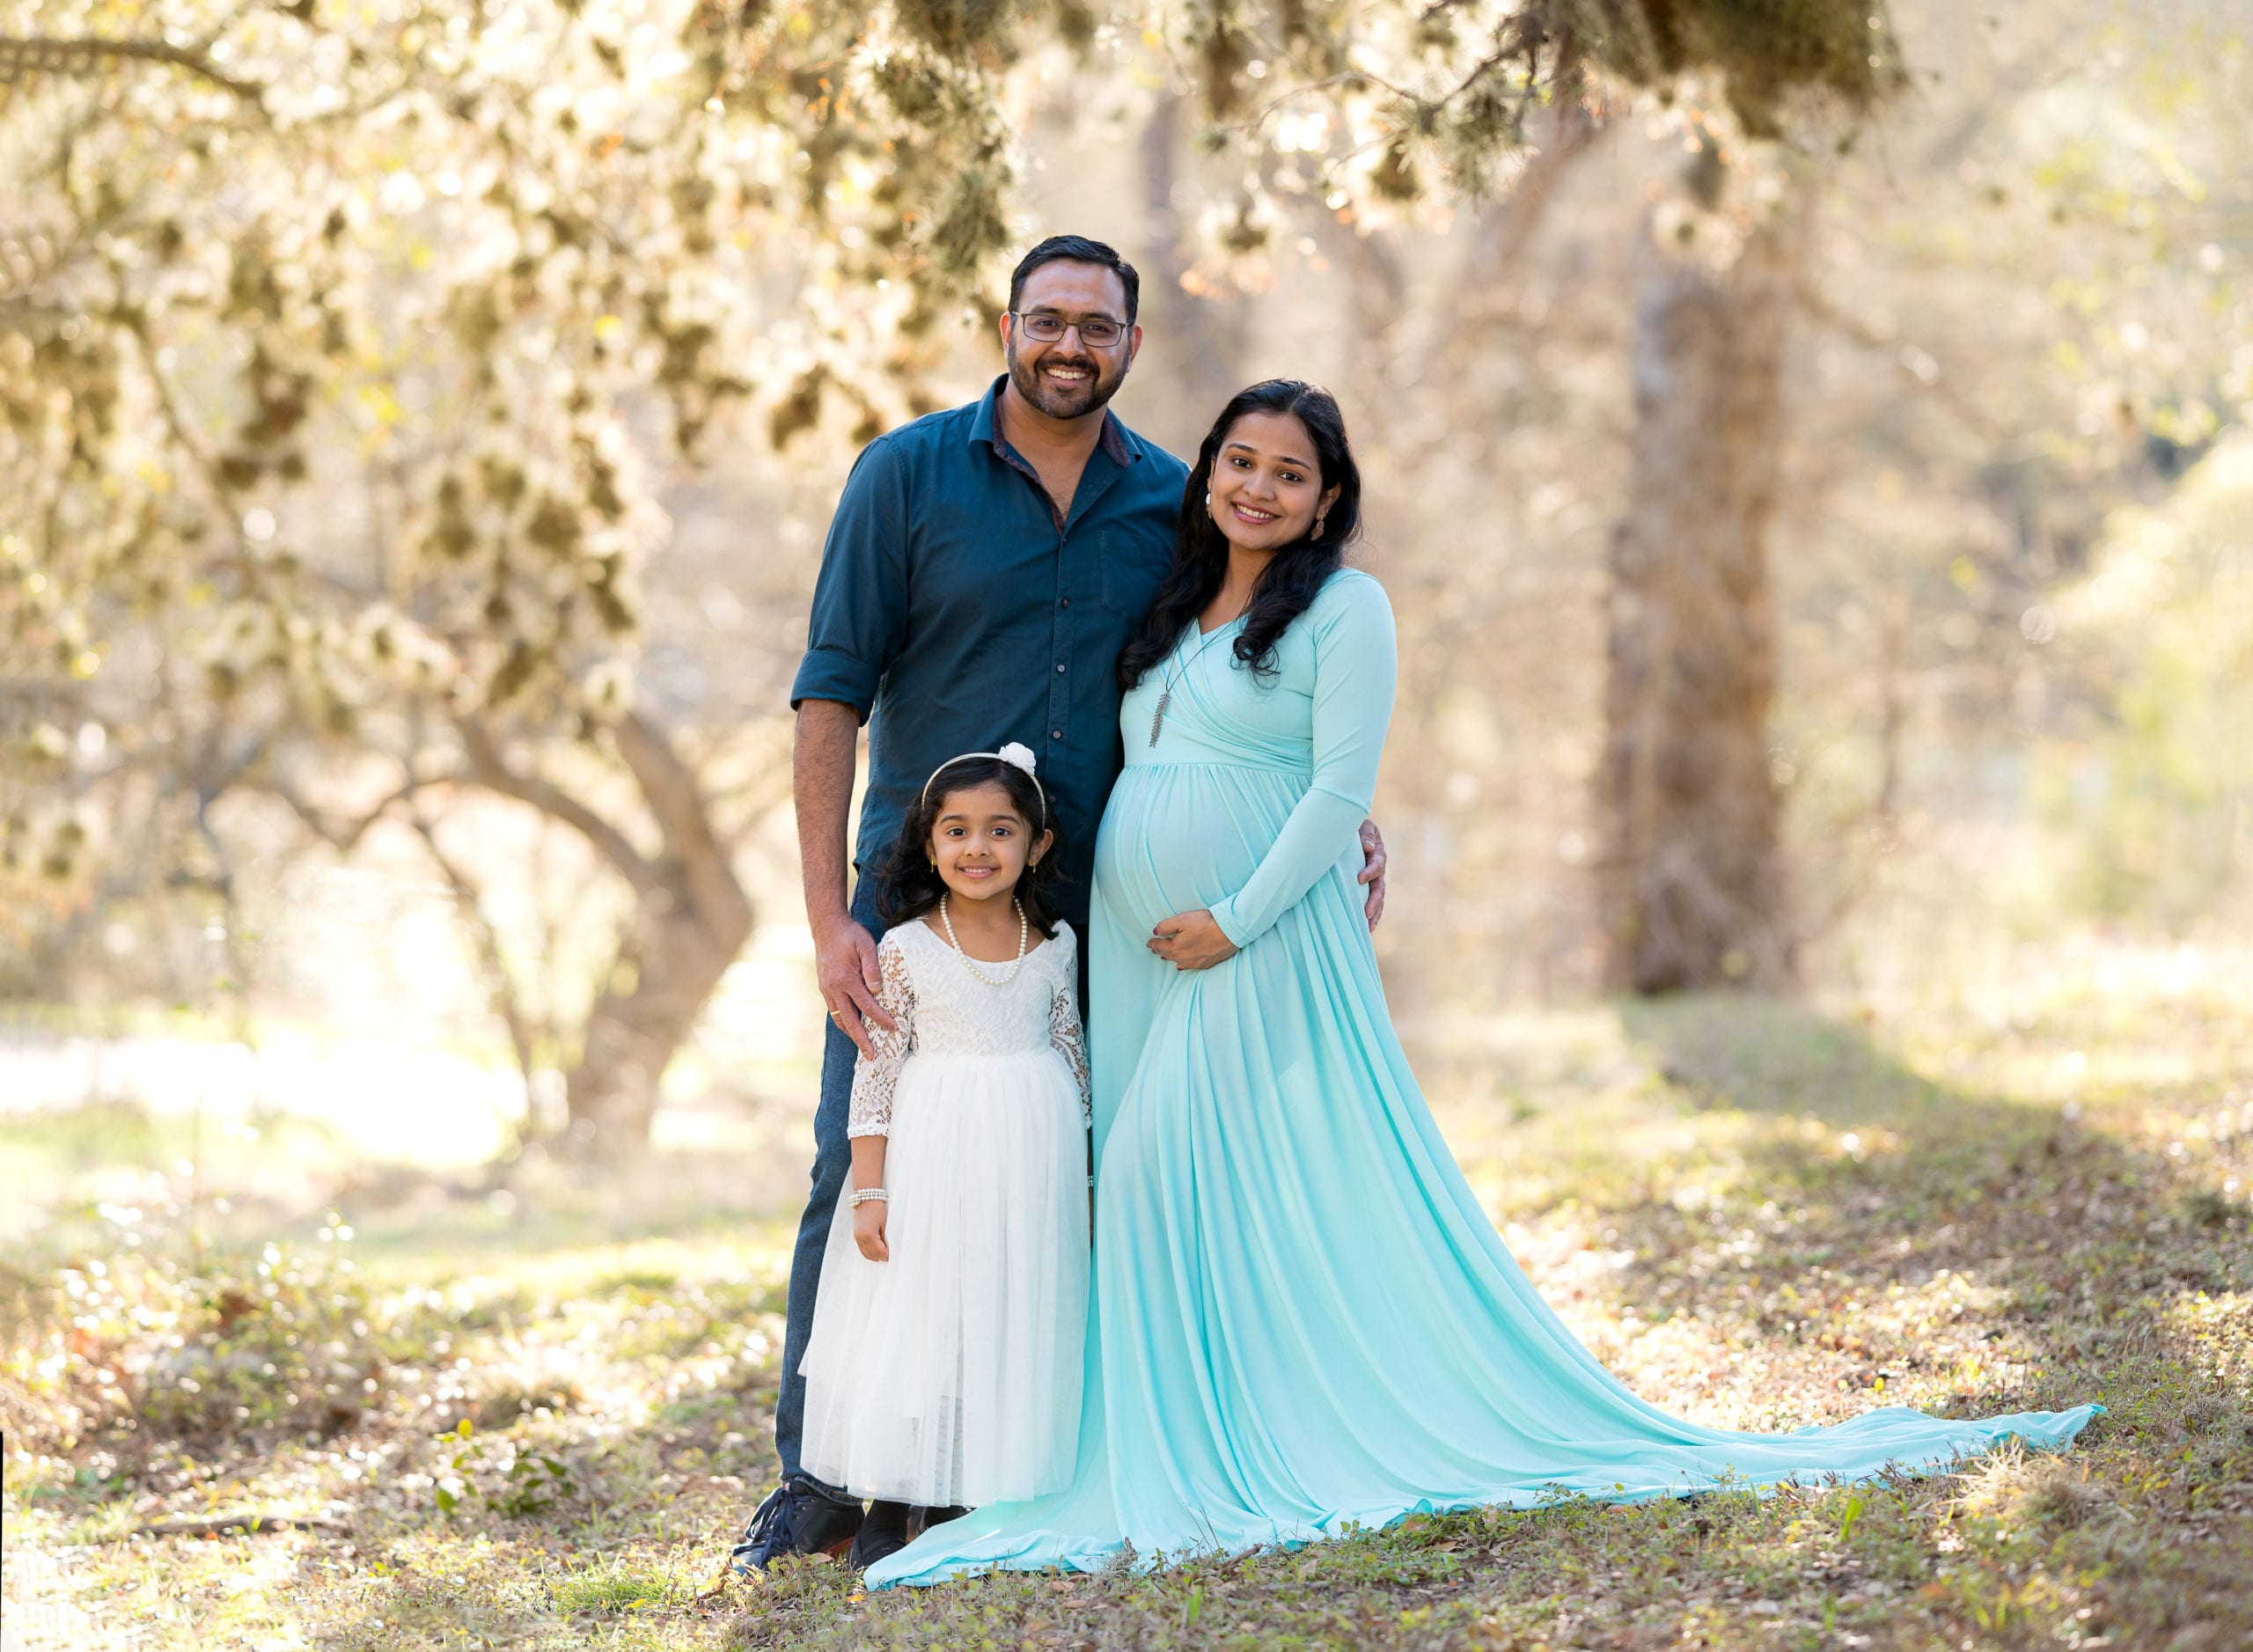 A family of 3 for an outdoor maternity photoshoot